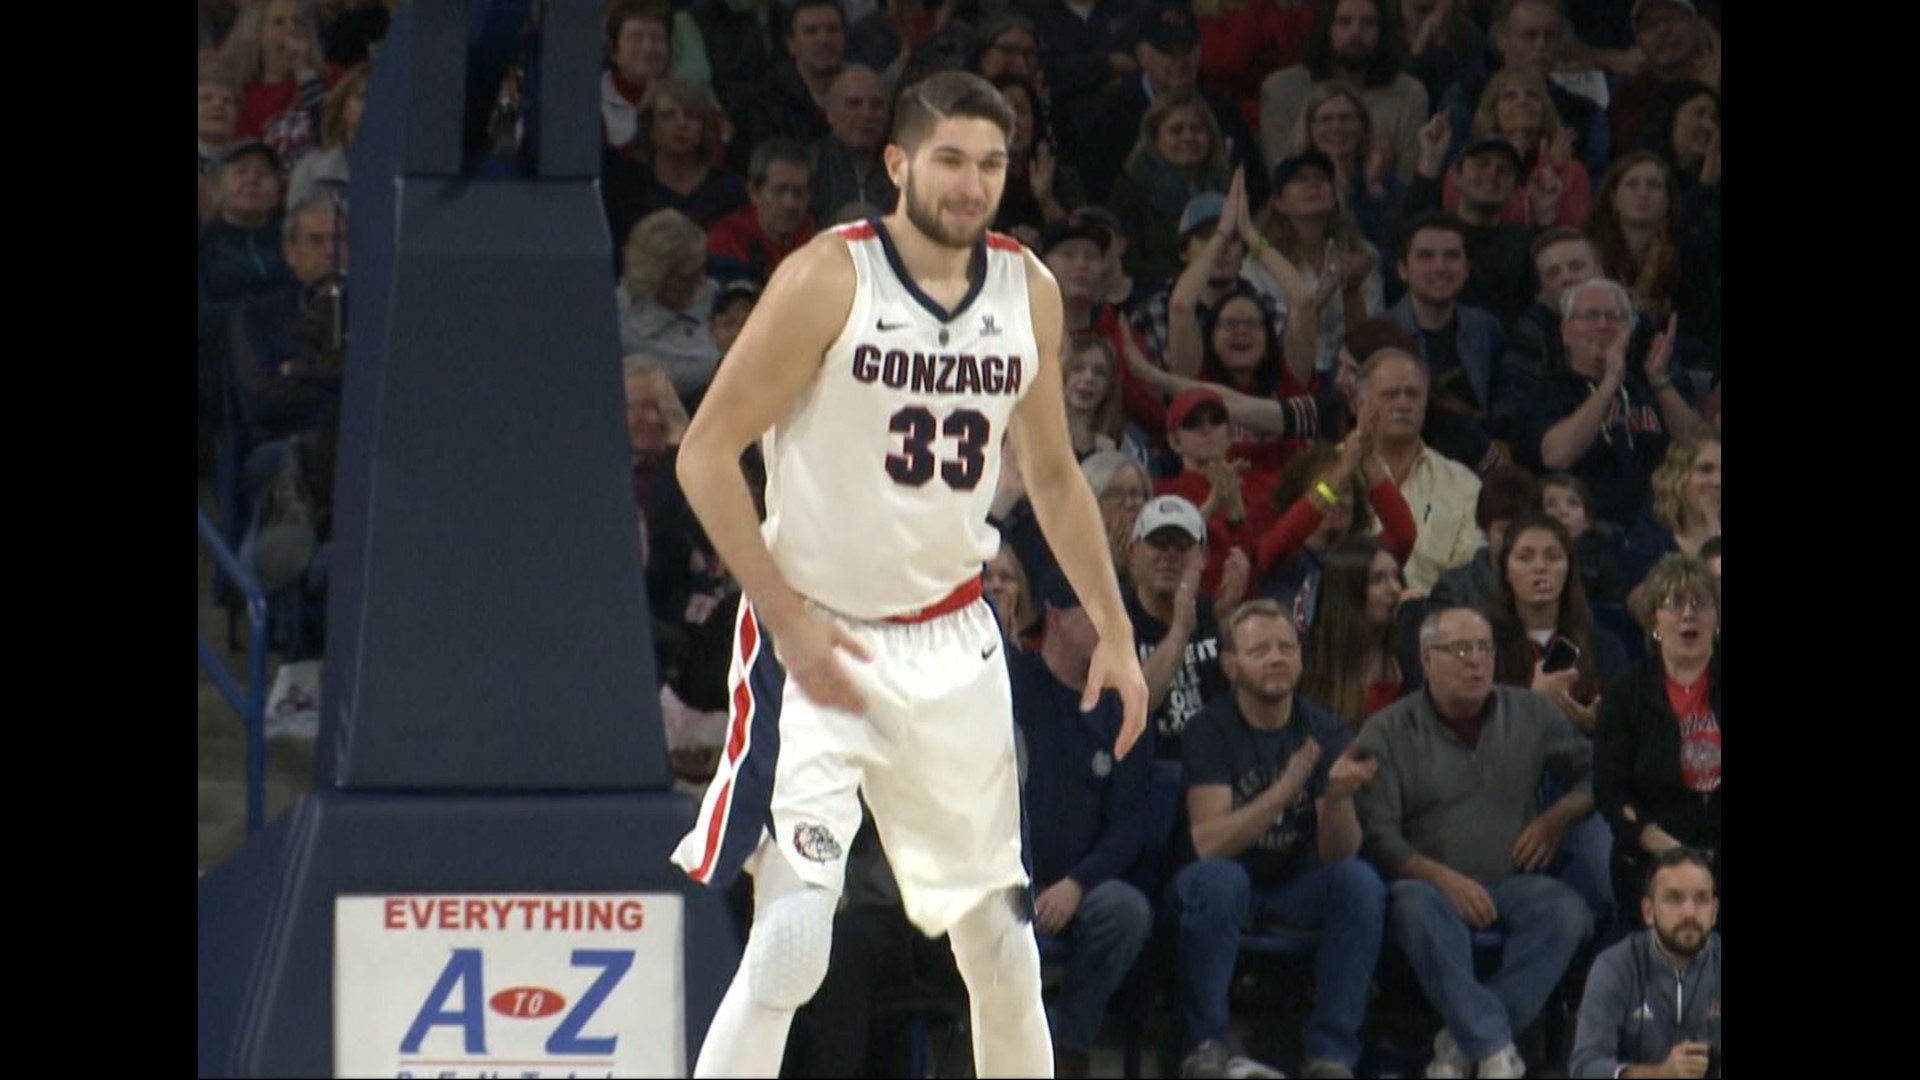 The French forward is expected to return soon, maybe as early as the West Coast Conference tournament. See how he helps the Zags' stat line when he's able to play.